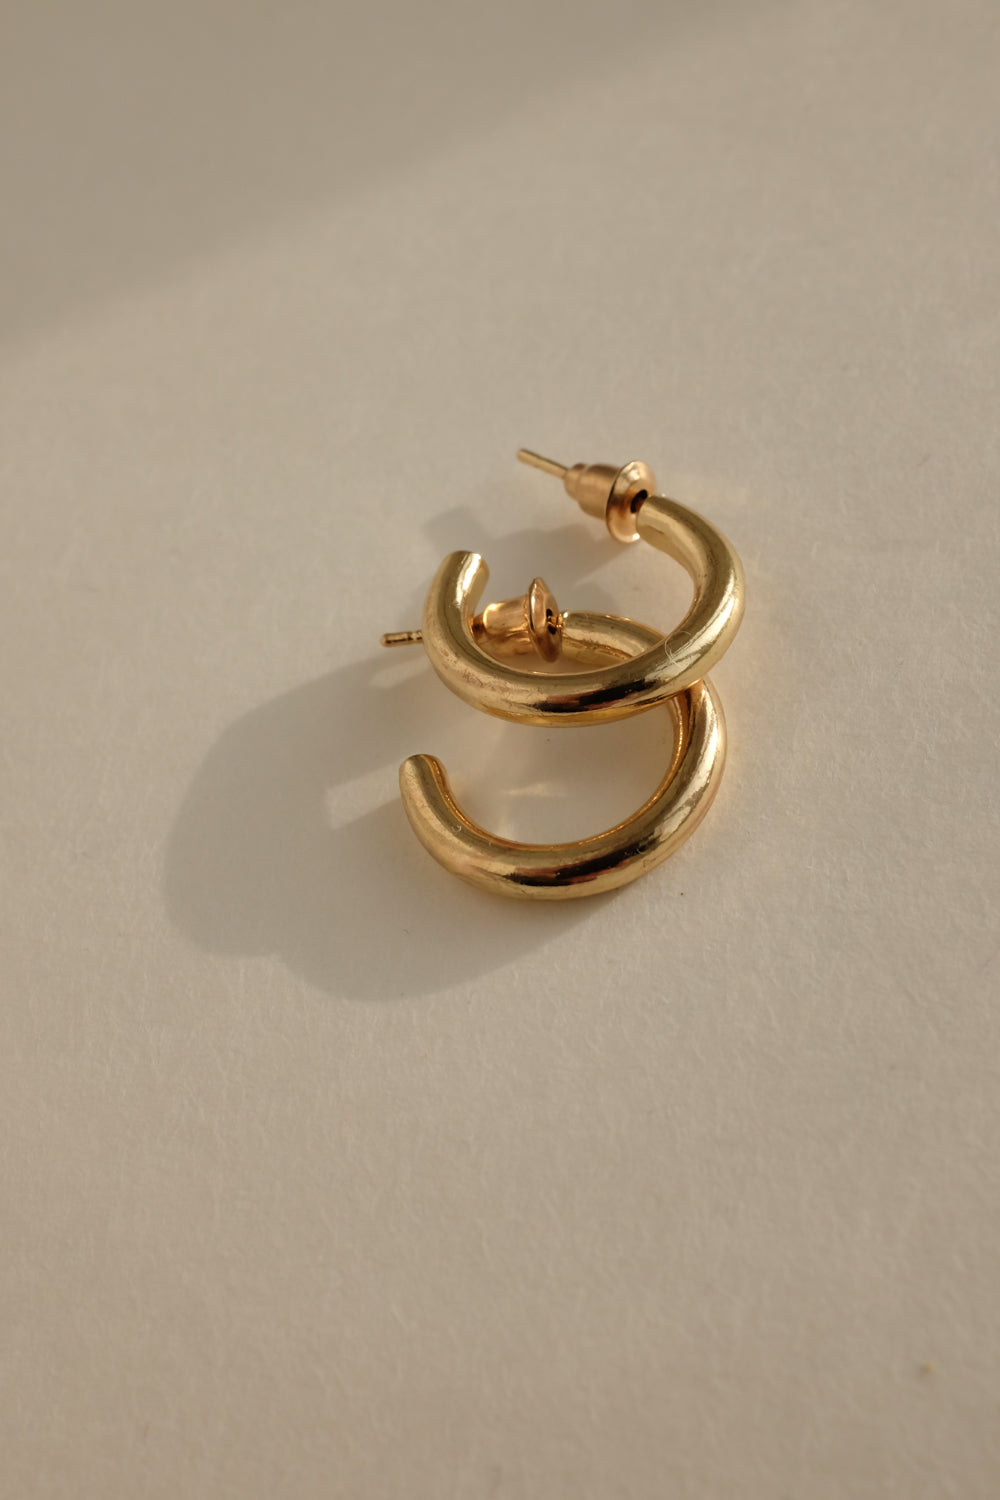 SMALL VINTAGE GOLD HOOPS